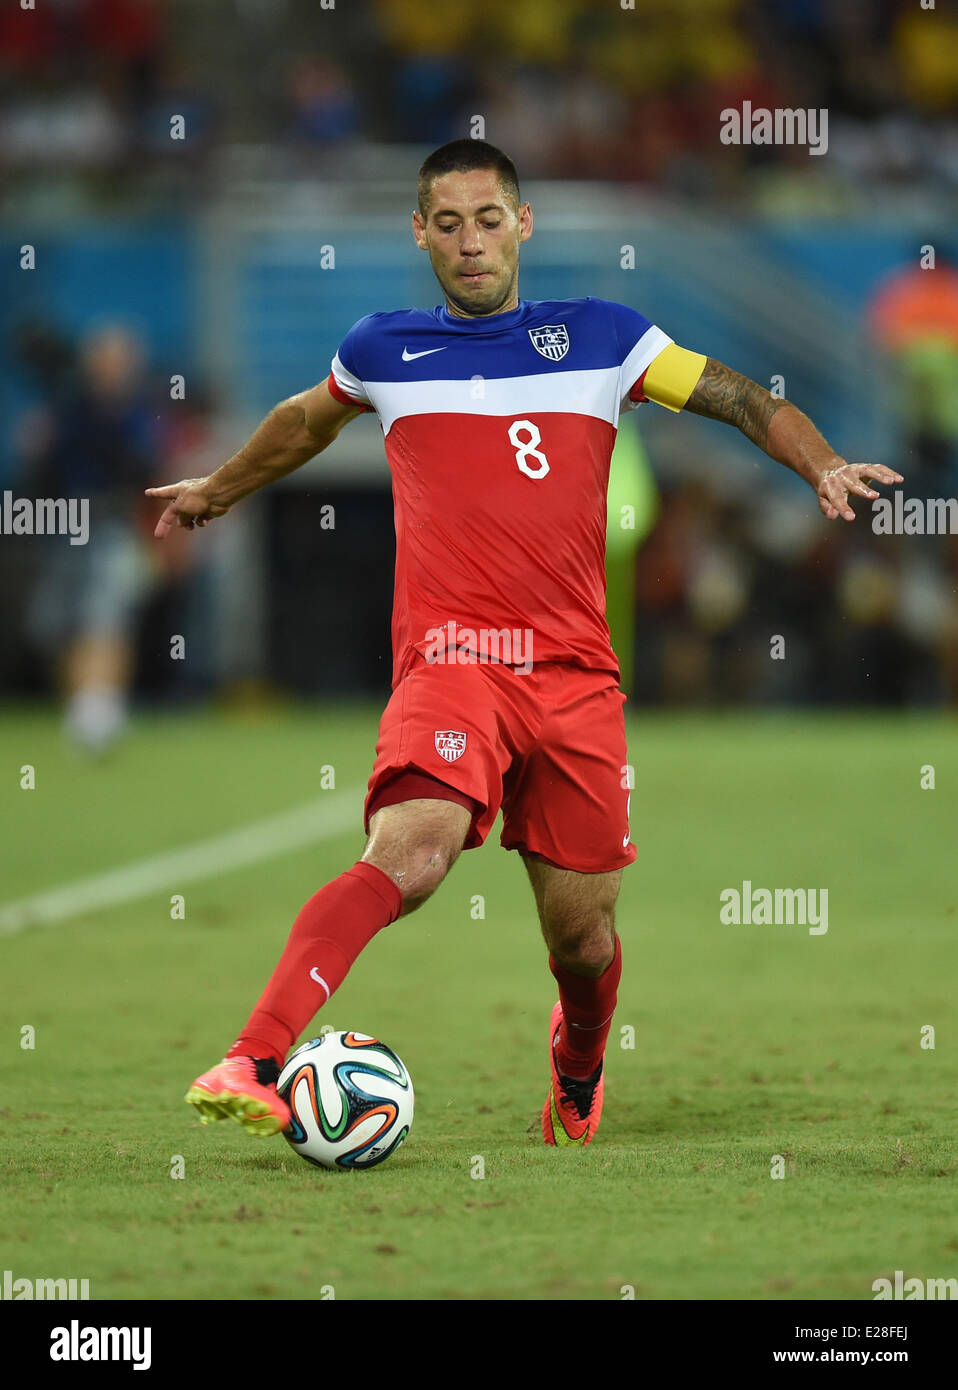 Natal, Brazil. 16th June, 2014. Clint Dempsey of USA in action during the FIFA World Cup 2014 group G preliminary round match between Ghana and the USA at the Estadio Arena das Dunas Stadium in Natal, Brazil, 16 June 2014. Credit:  dpa picture alliance/Alamy Live News Stock Photo